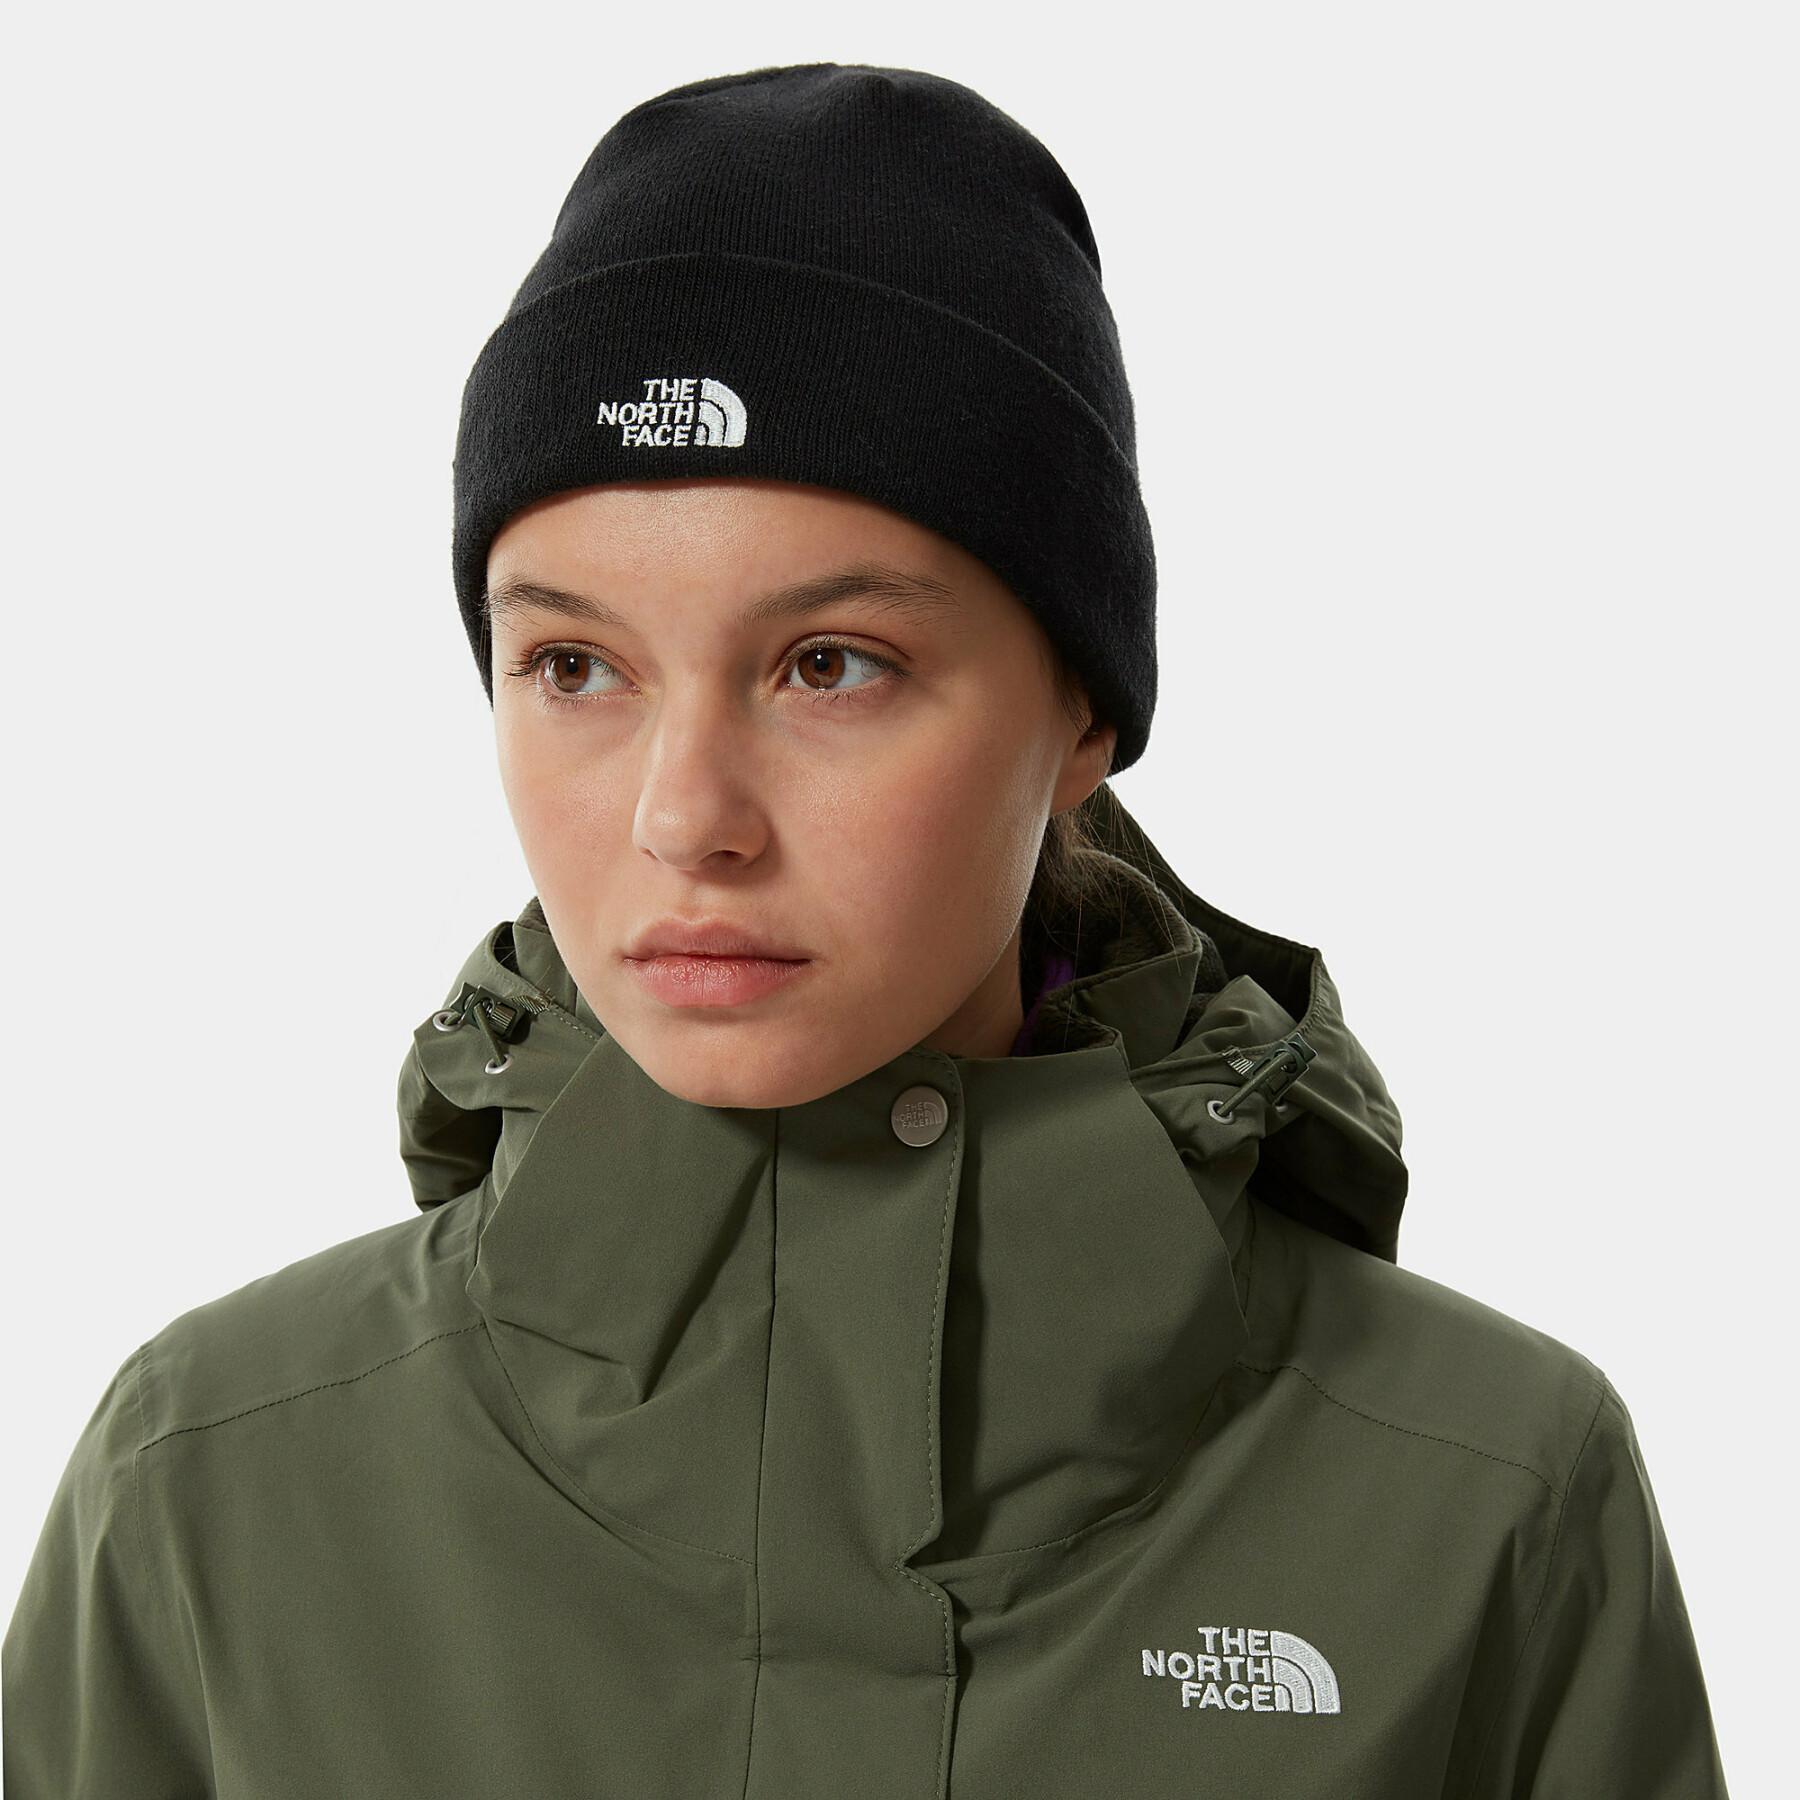 Mütze The North Face Norm Shallow